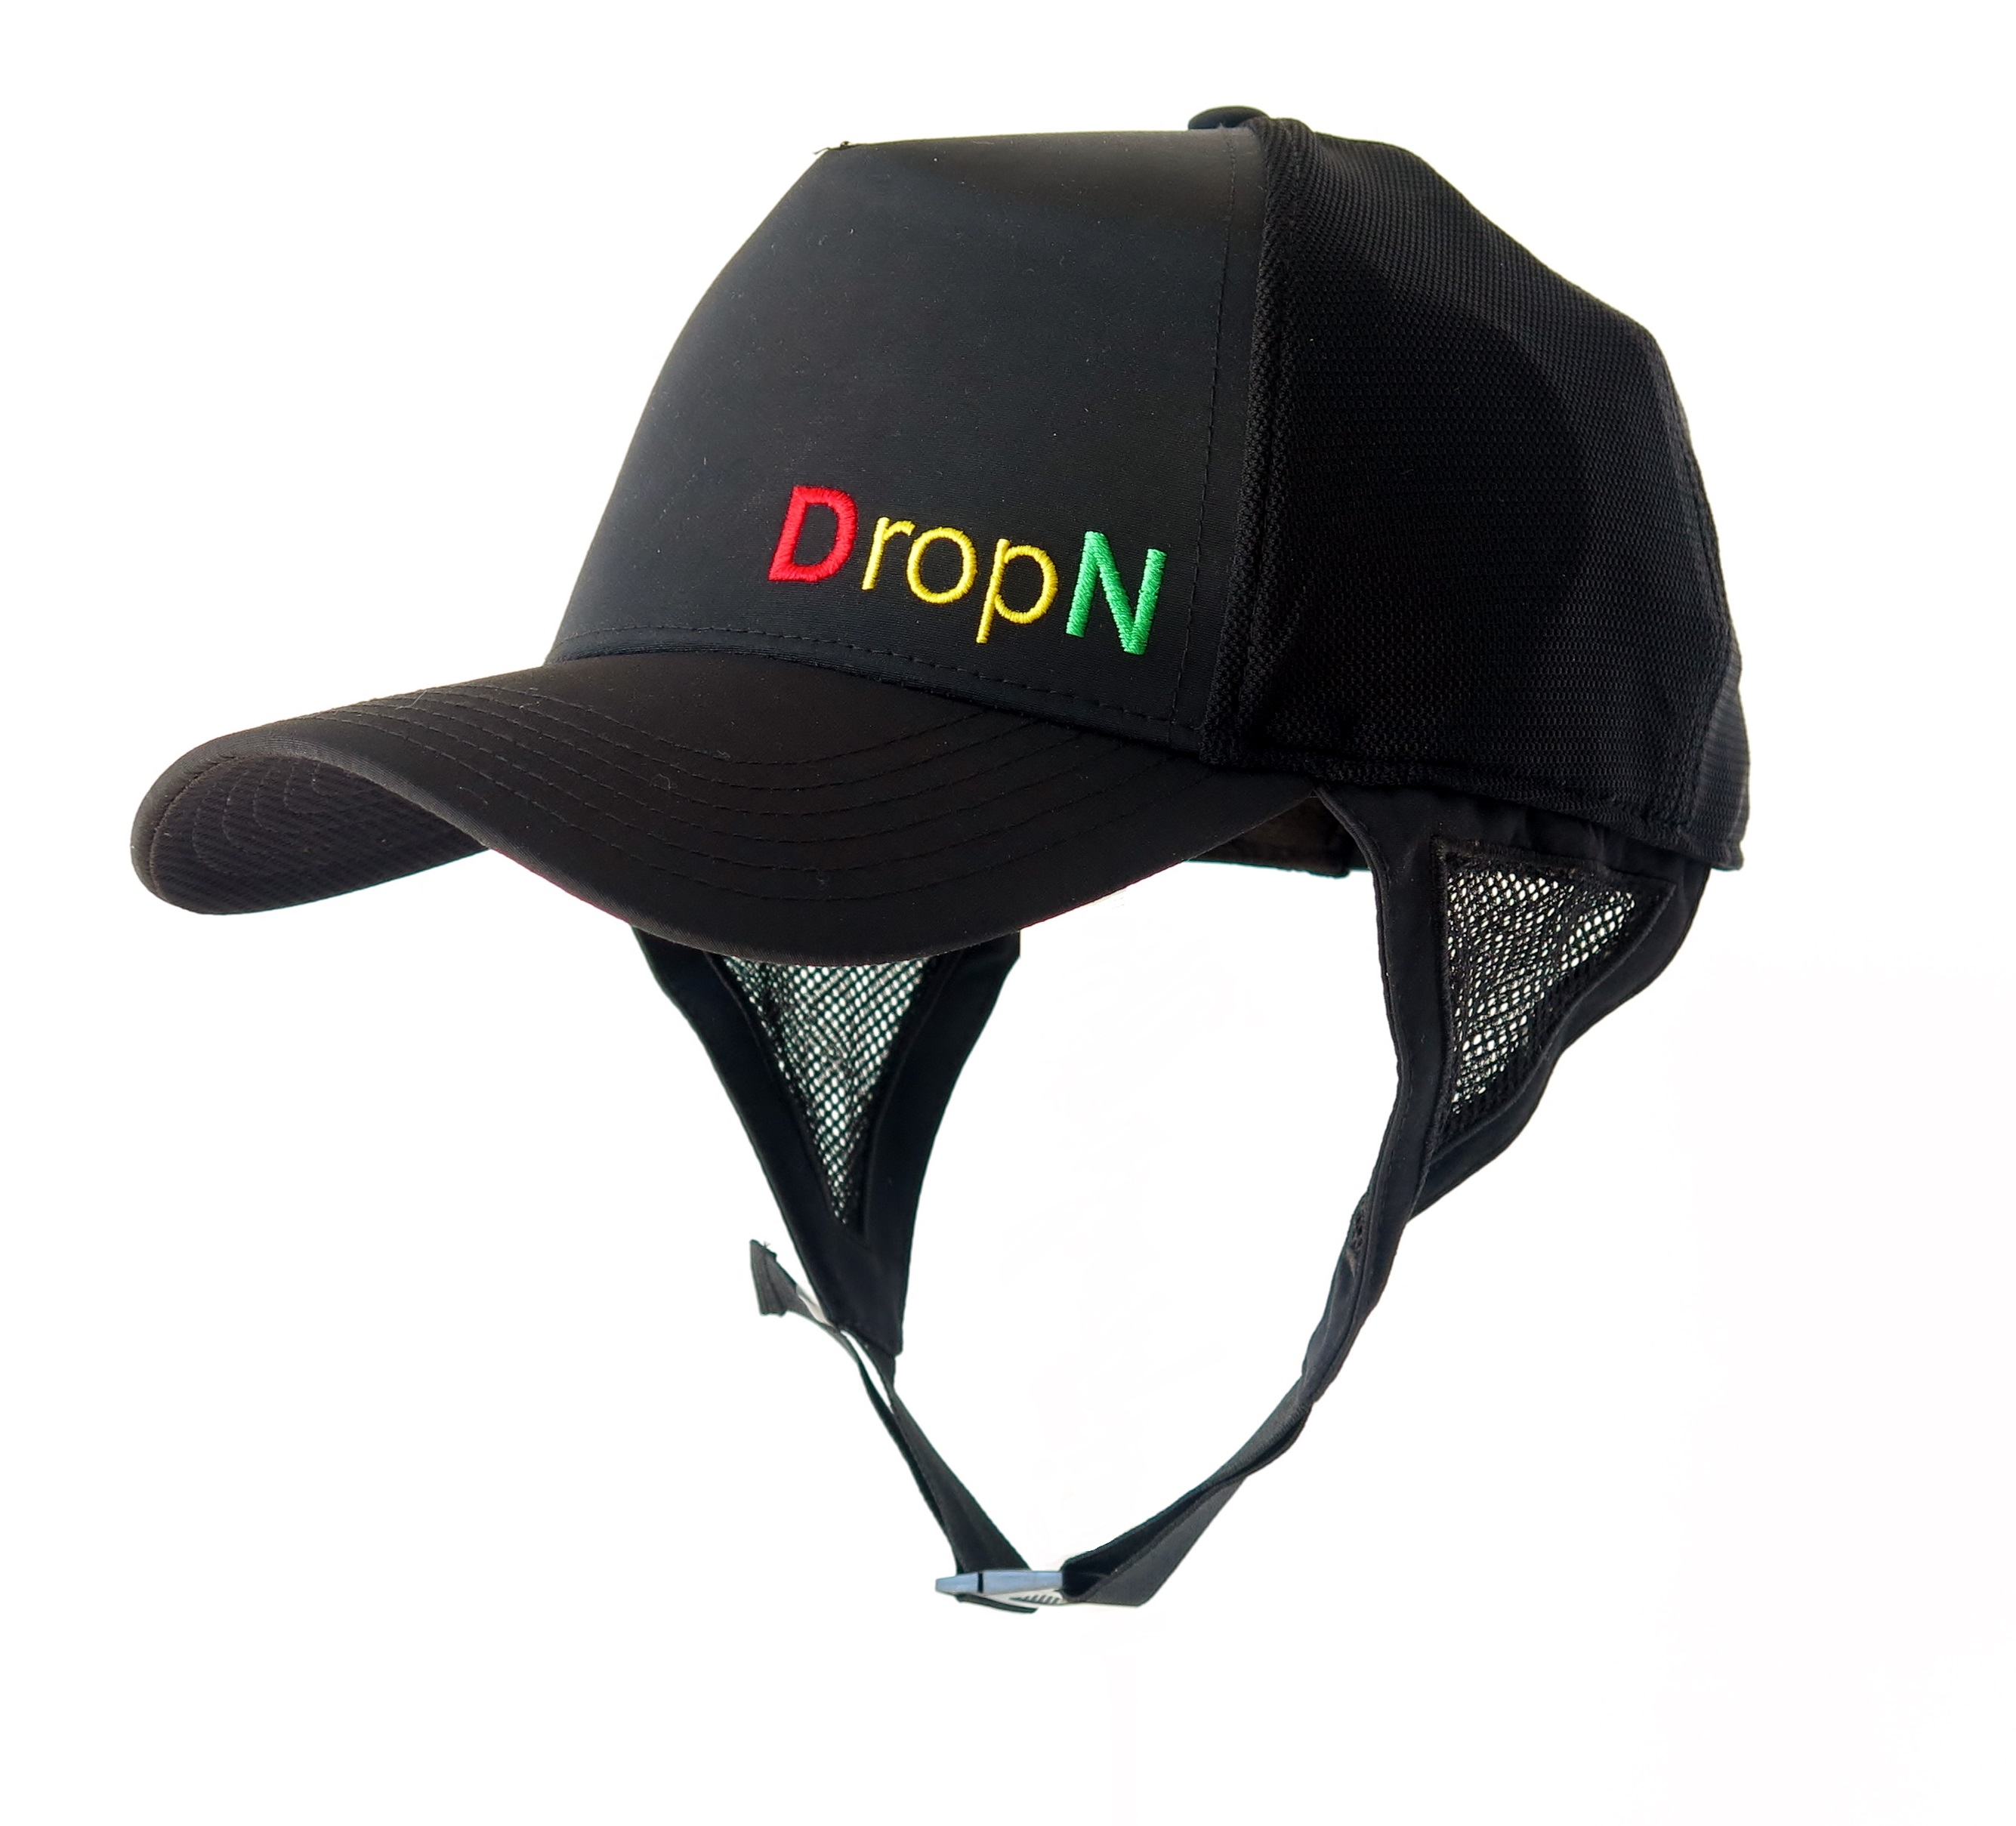 Hat and Gear Strap Surf Chin Surf DropN™ Rasta Surf DropN - - - Logo with Apparel